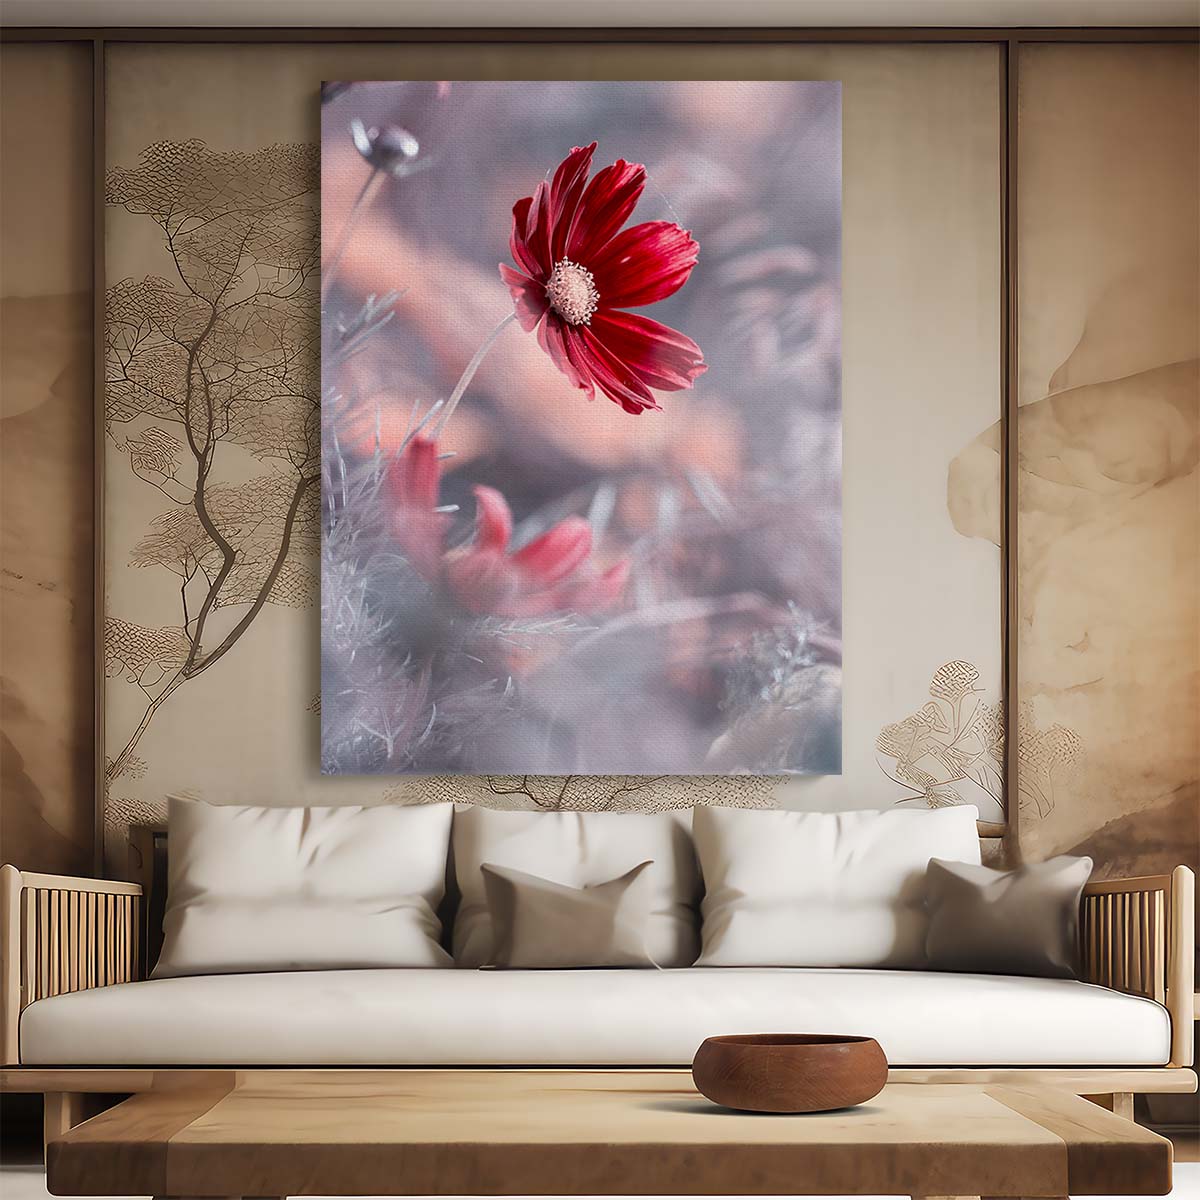 Romantic Red Floral Macro Photography - Passionate Valentine Blossom Art by Luxuriance Designs, made in USA